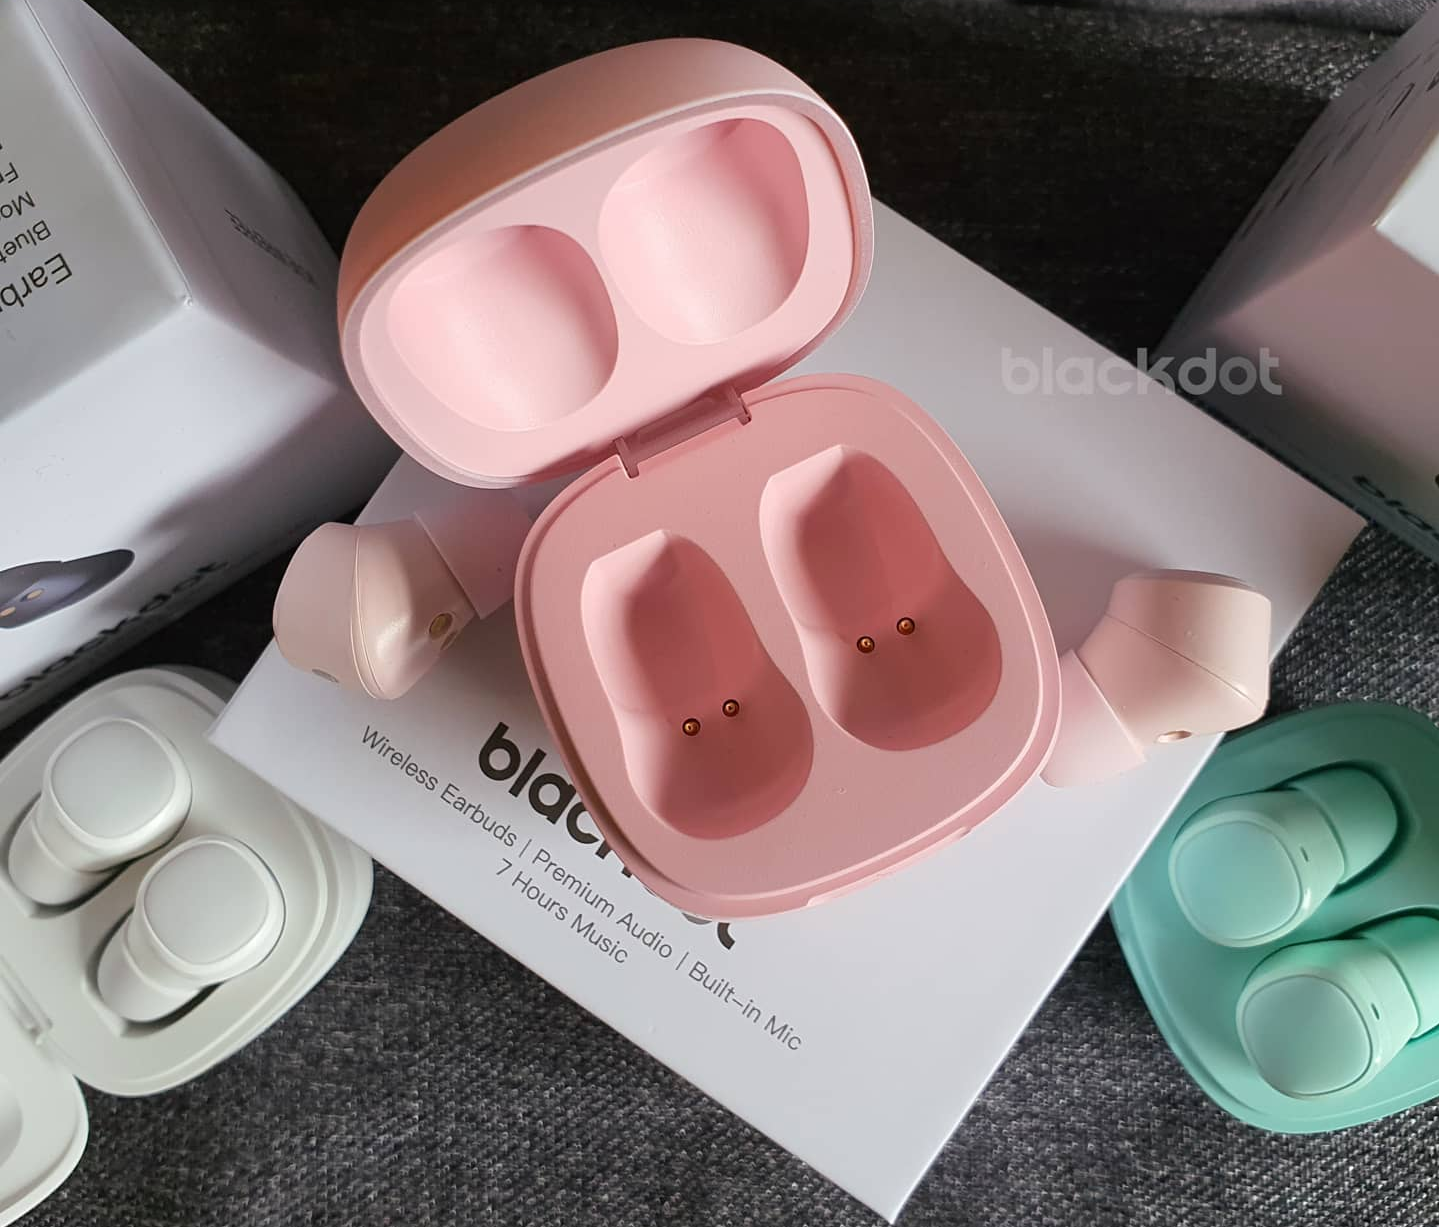 wireless earbuds blackdot white pink teal